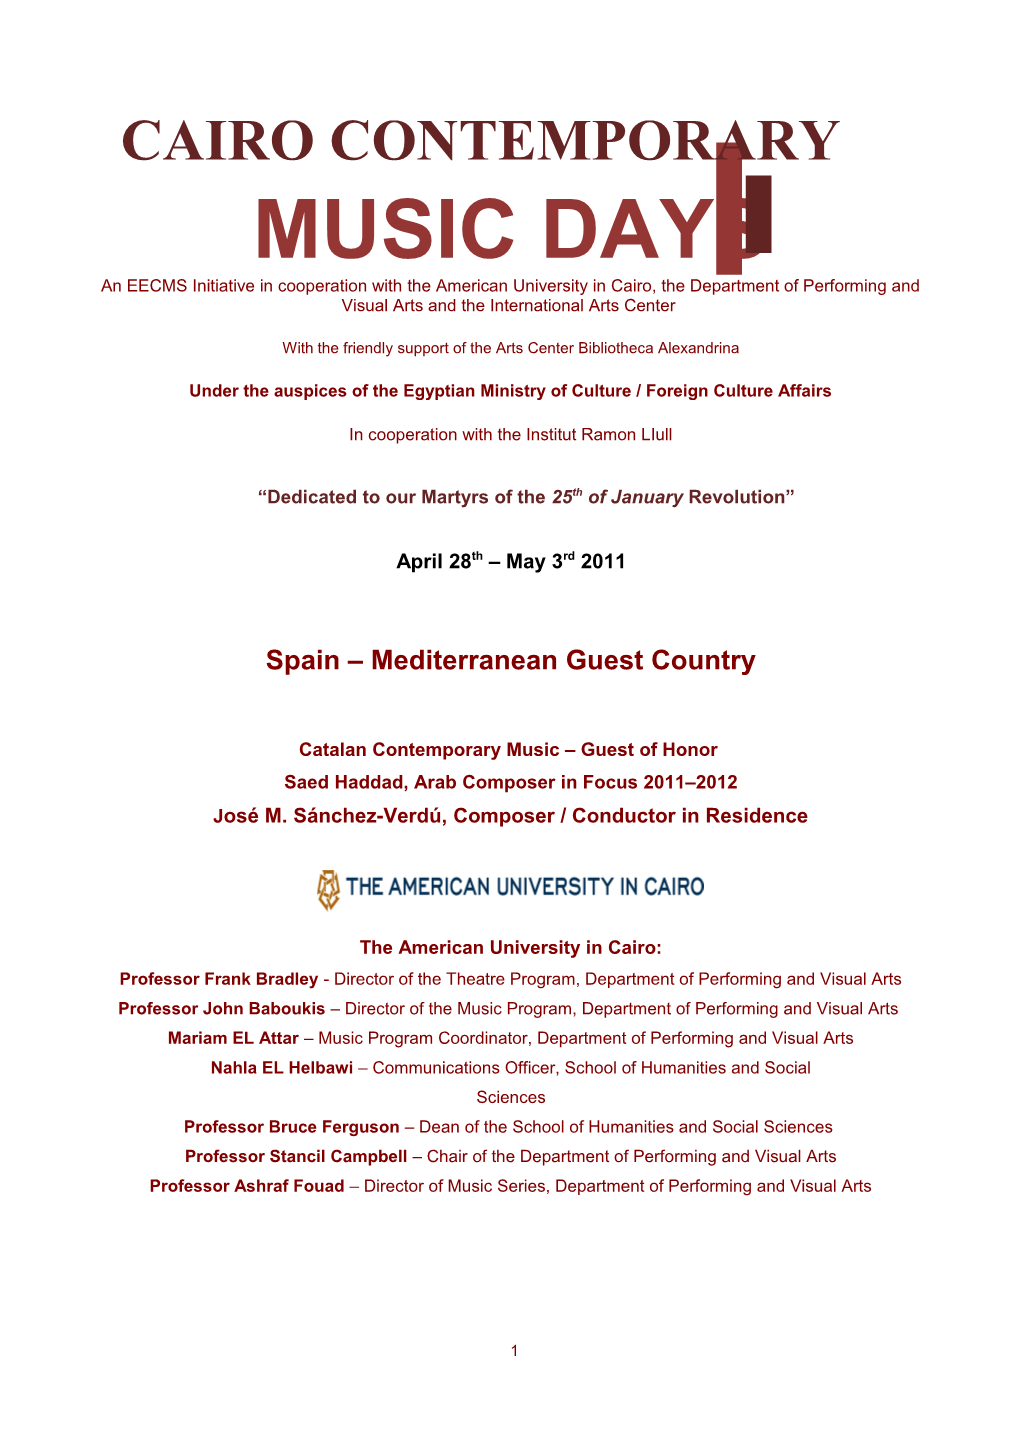 MUSIC DAYS an EECMS Initiative in Cooperation with the American University in Cairo, the Department of Performing and Visual Arts and the International Arts Center